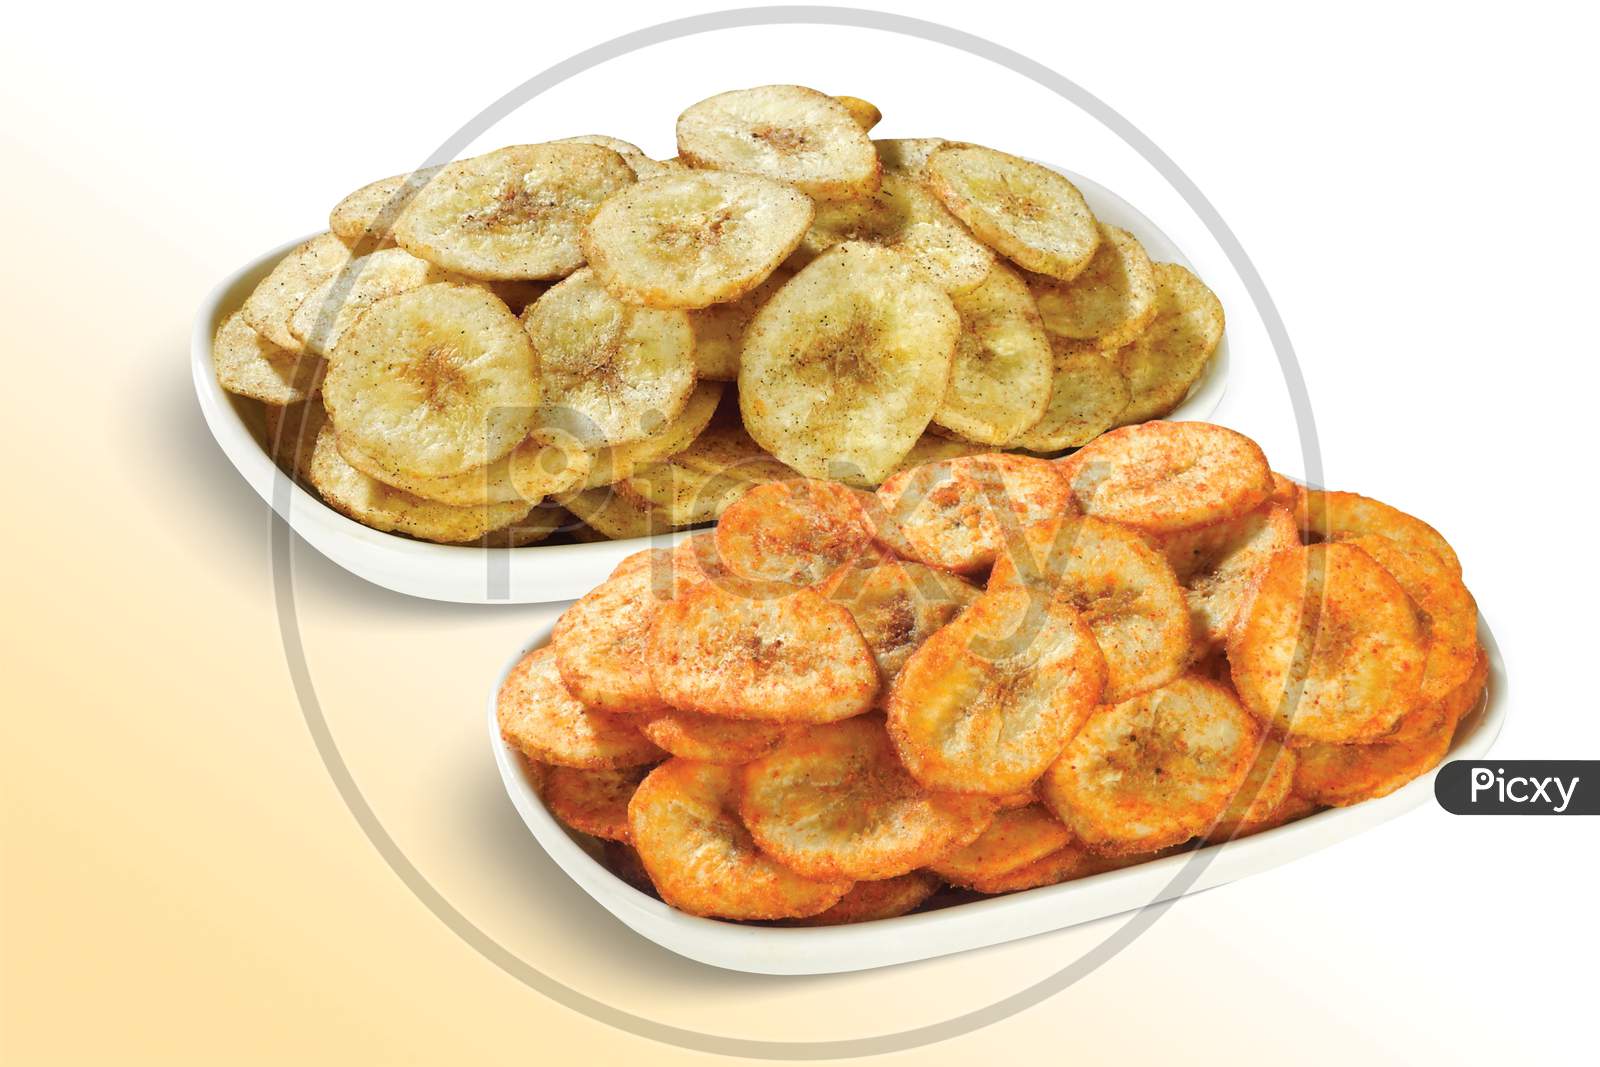 Banana Chips, Dried Banana Chips Snack, Kela Wafer, Salted Wafers, Kerala Cuisine, Fried Spicy And Salty Food, Namkeen Or Fryums